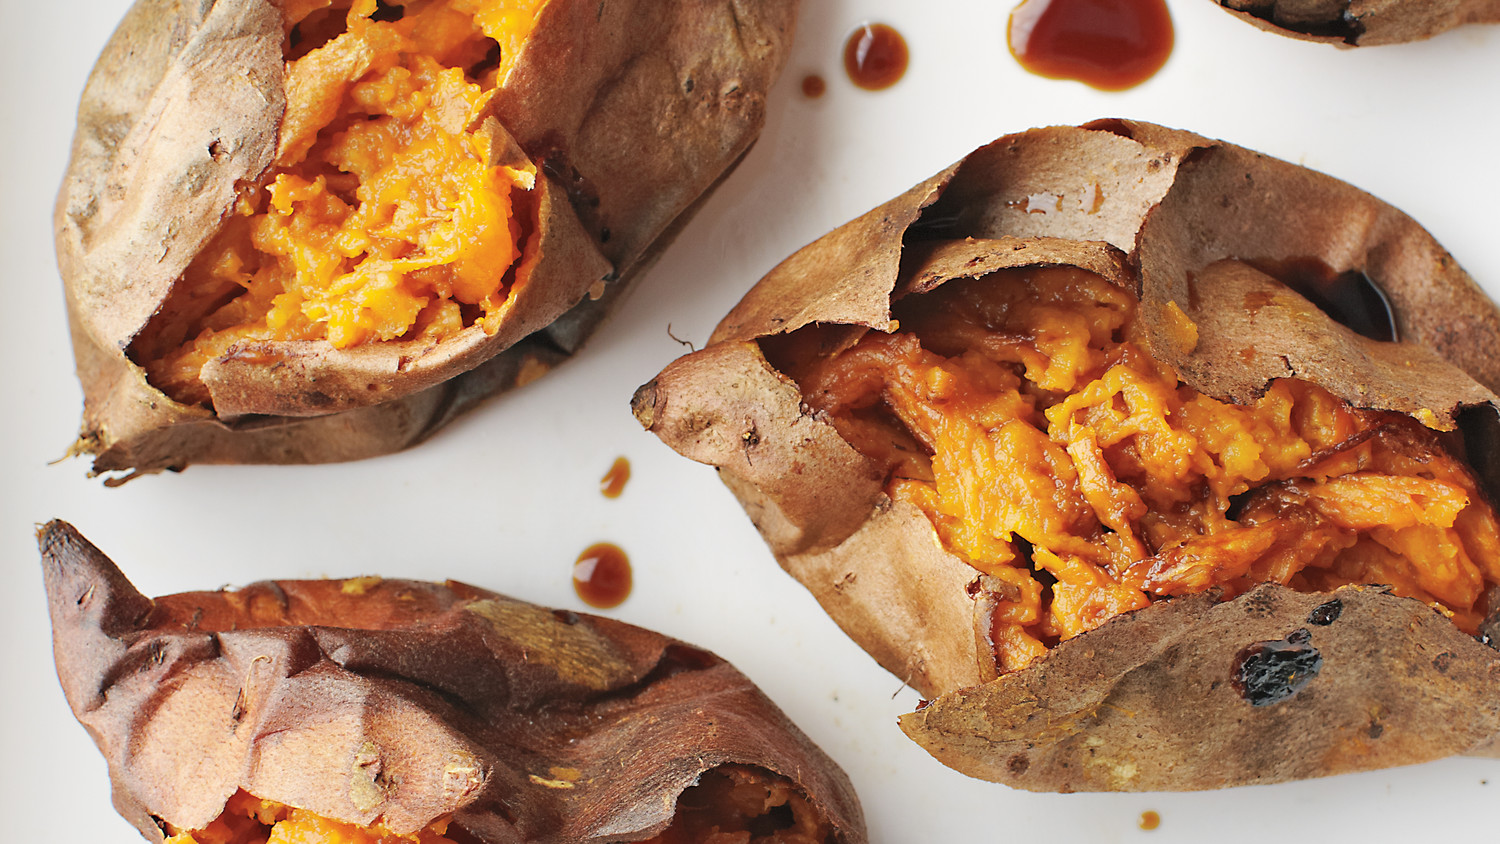 Roasted Sweet Potatoes and Soy Sauce